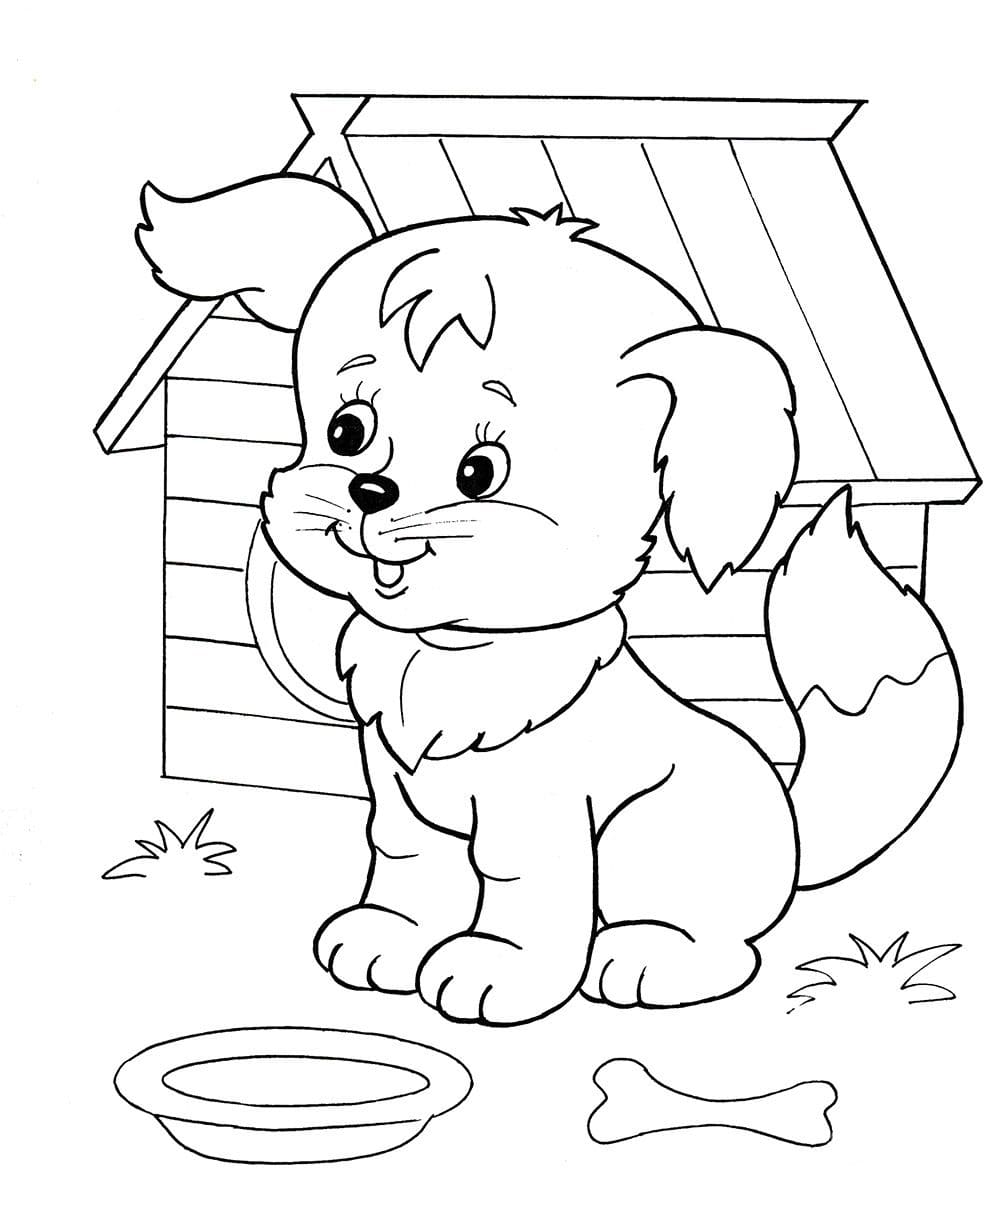 printable-coloring-pages-for-kindergarten-90-free-coloring-pages